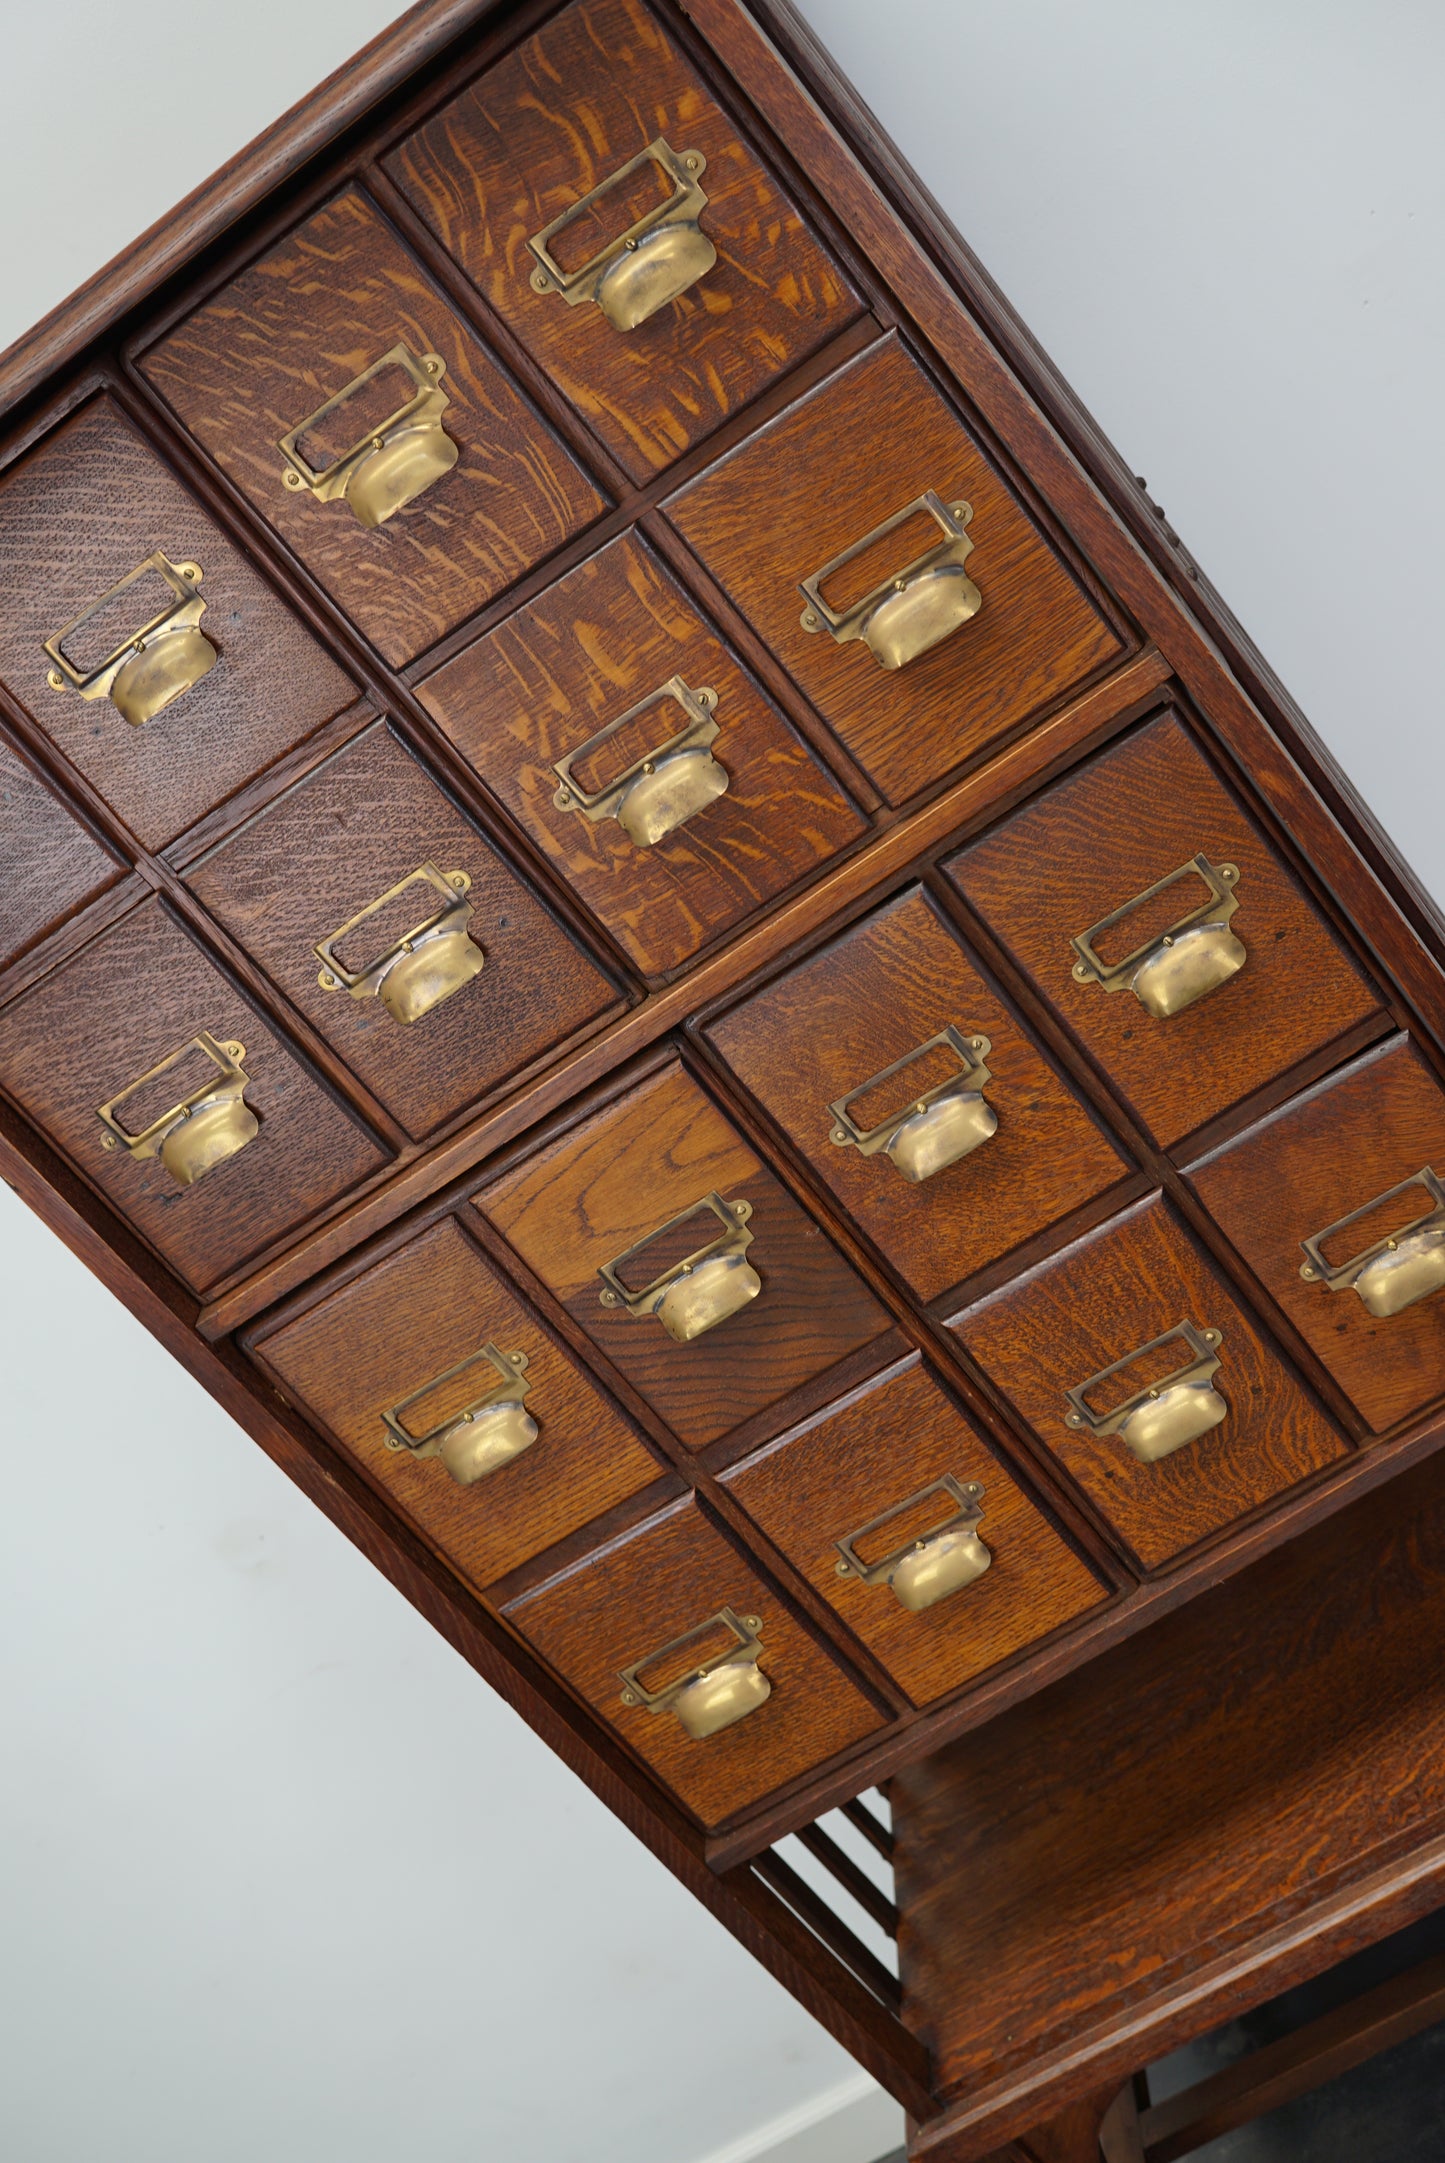 English Oak Apothecary Cabinet or Filing Cabinet, Early 20th Century